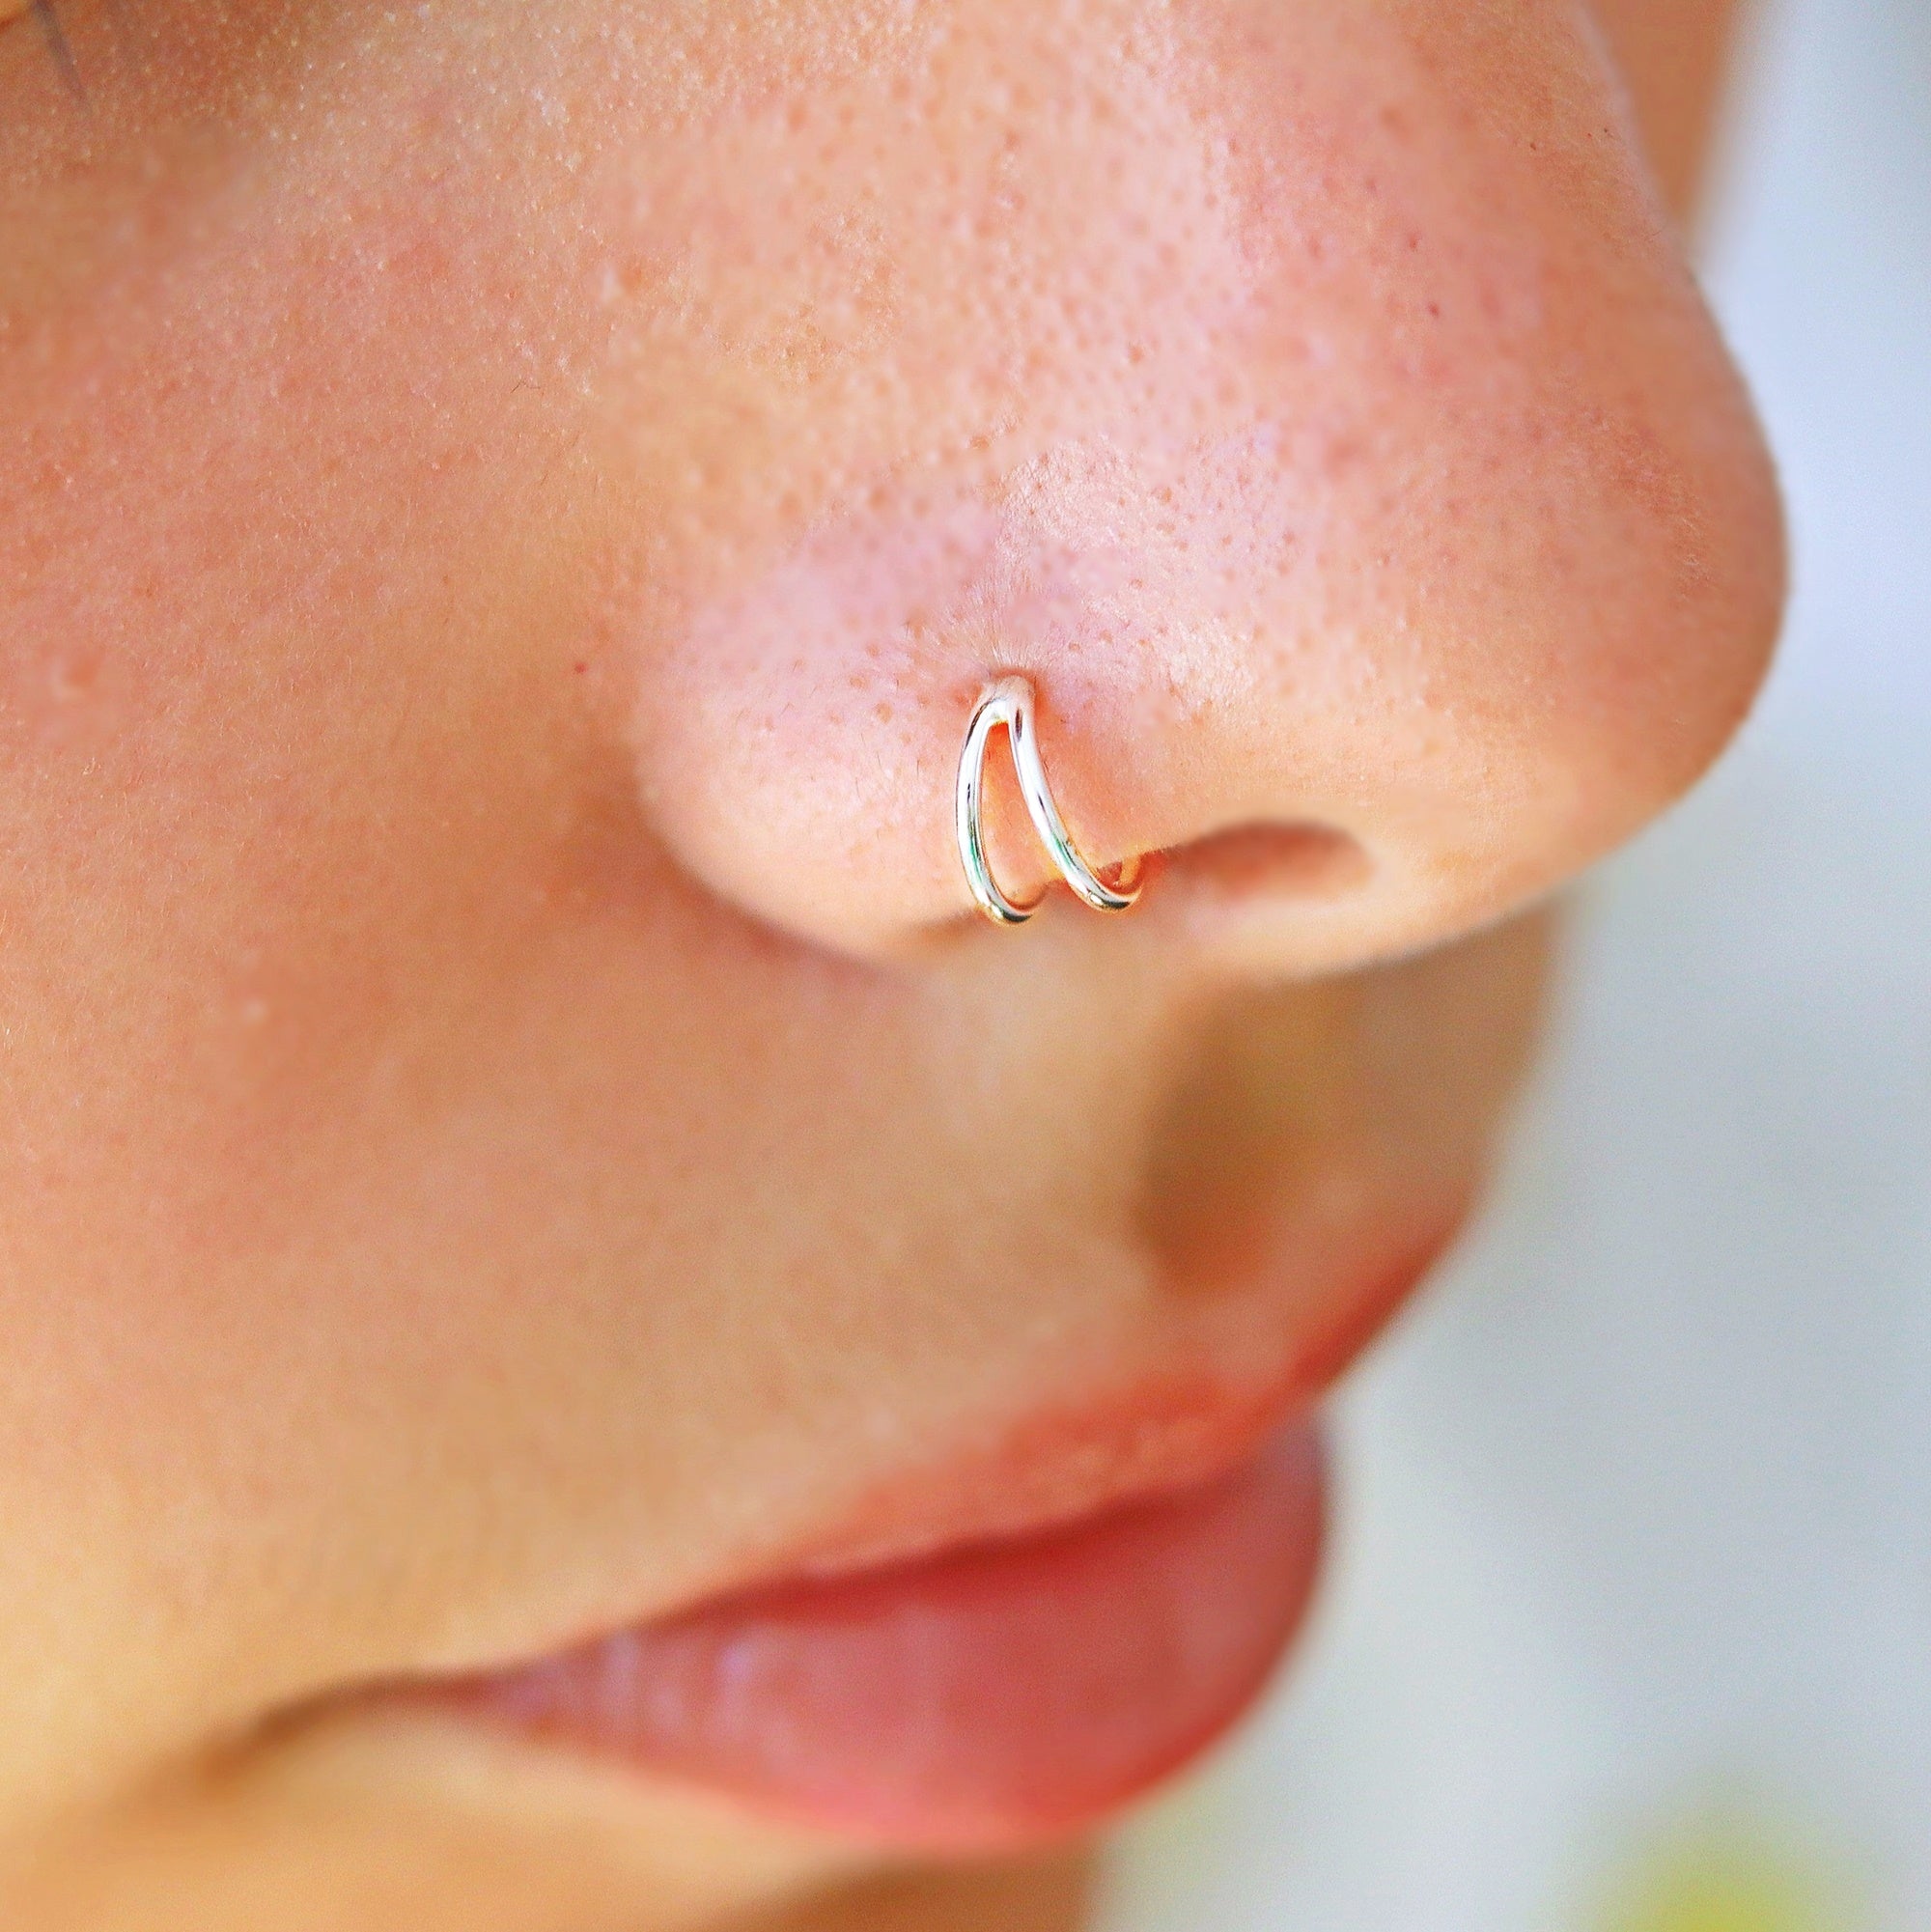 Double Nose Ring Hoop, Sterling Silver Nose Ring - TinyBox Jewelry